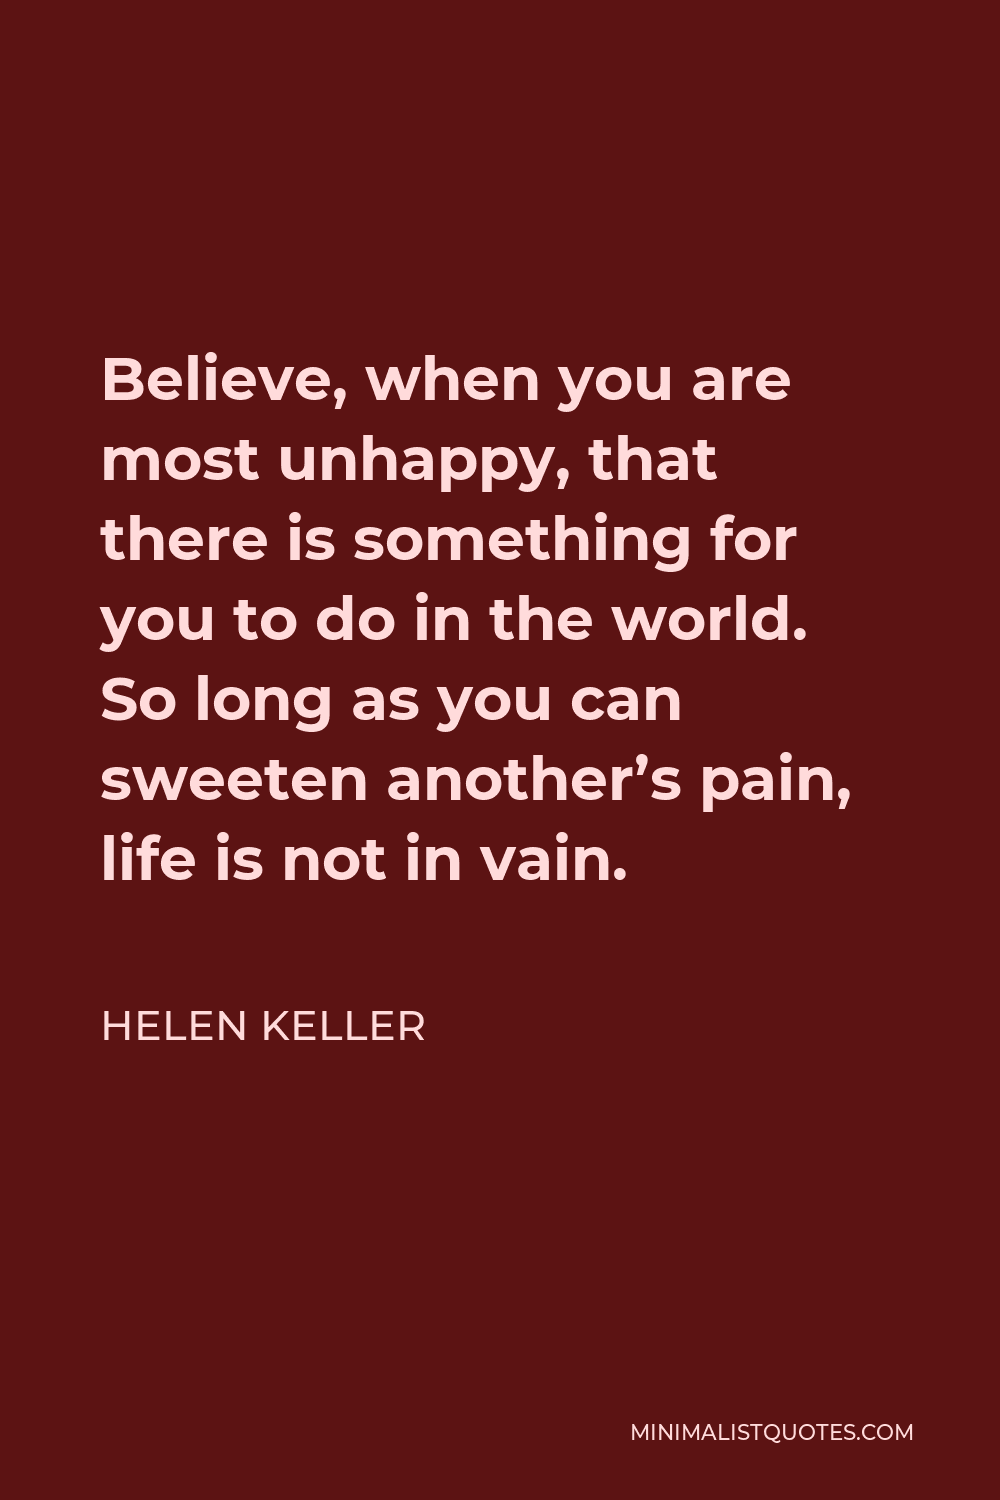 Helen Keller Quote - Believe, when you are most unhappy, that there is something for you to do in the world. So long as you can sweeten another’s pain, life is not in vain.